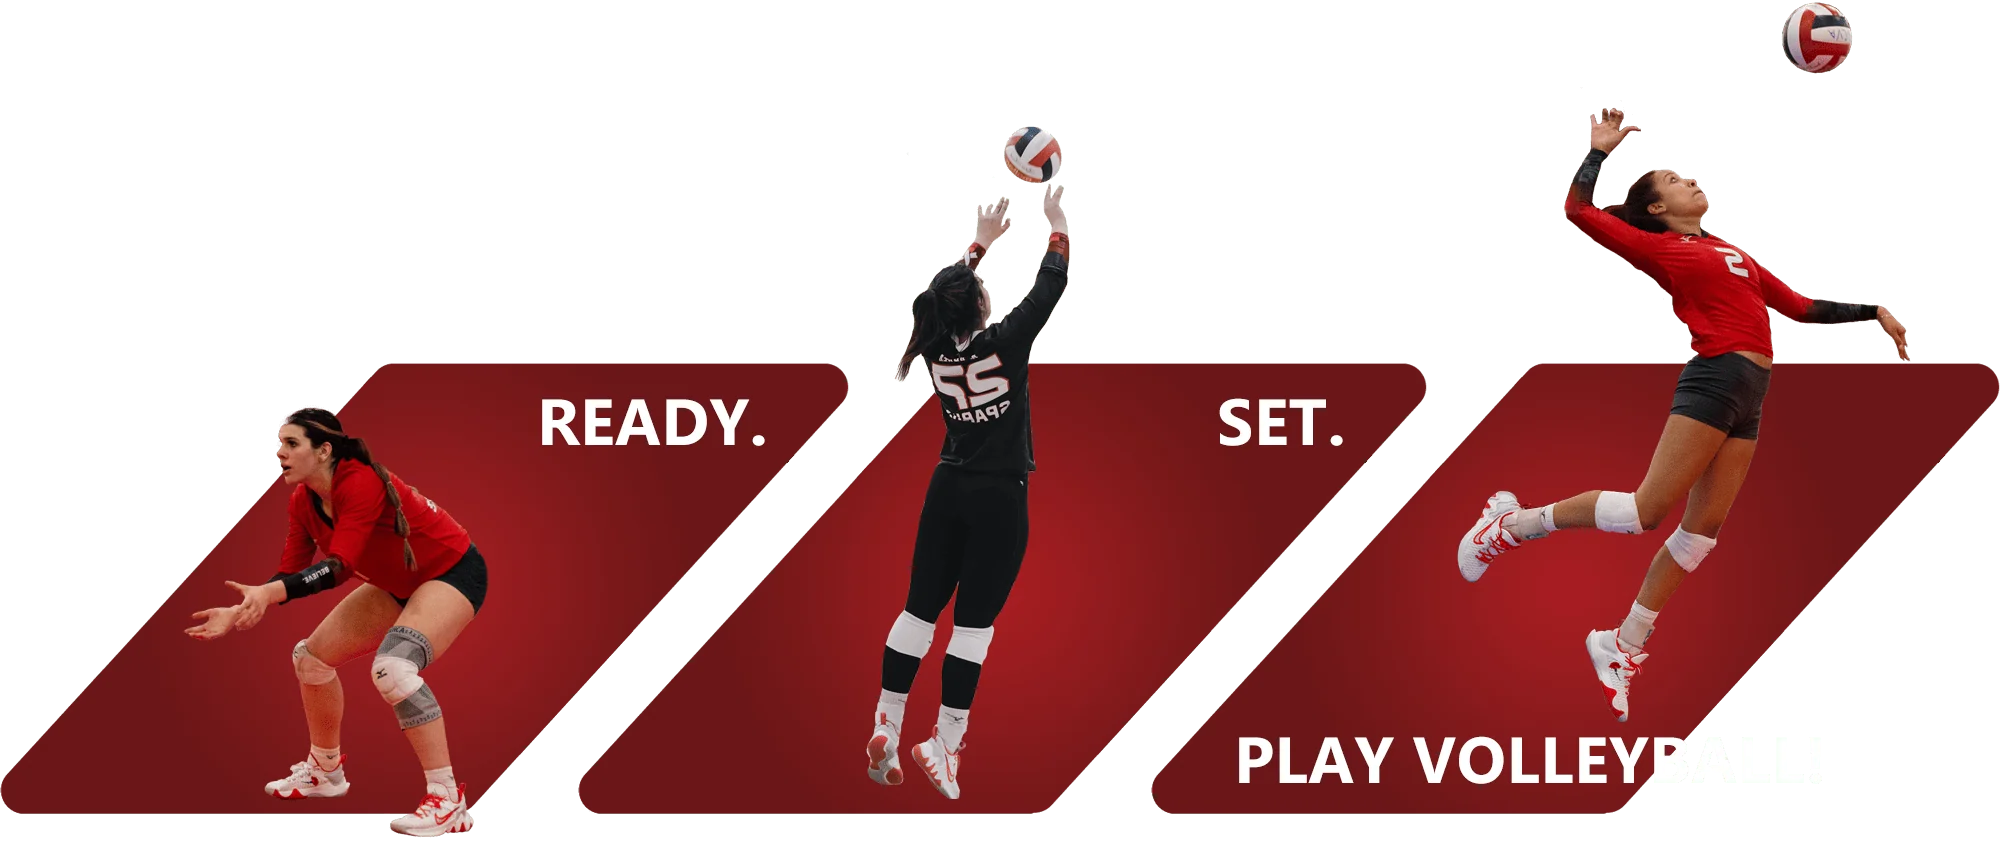 Ready, Set, Play Volleyball!